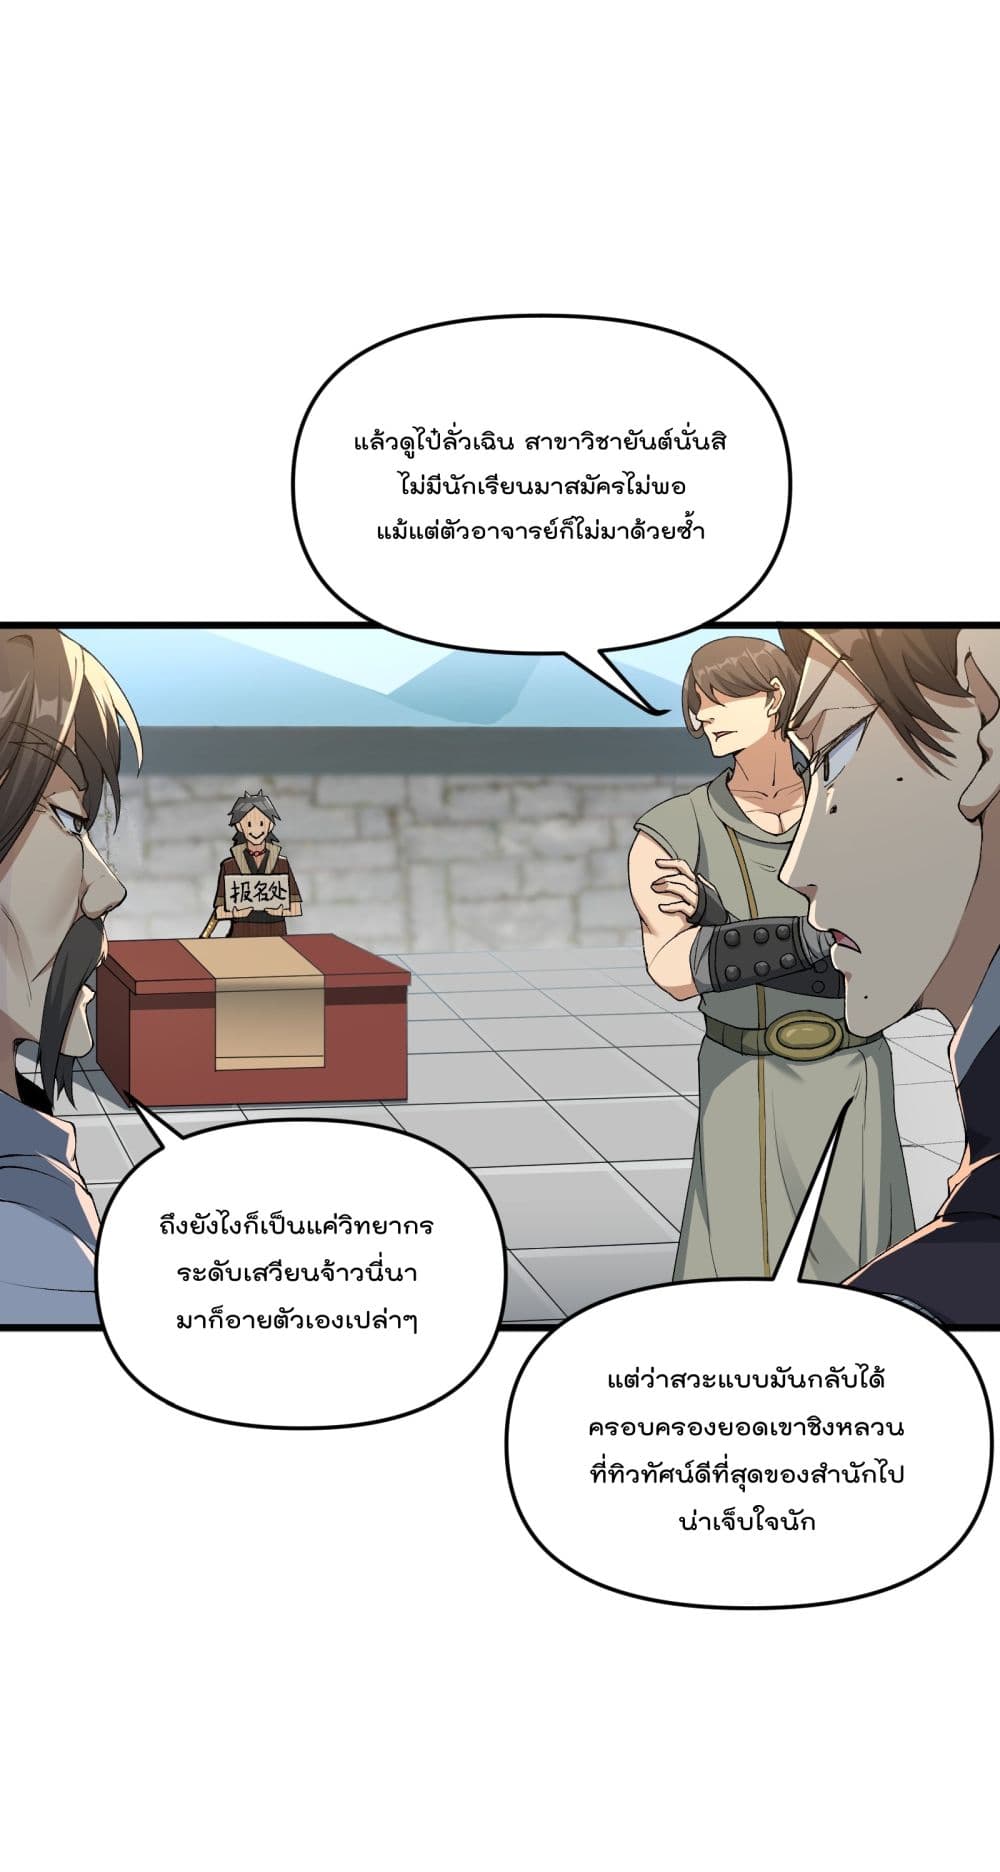 Ten Years After Chopping Woodตอนที่ 1 (27)